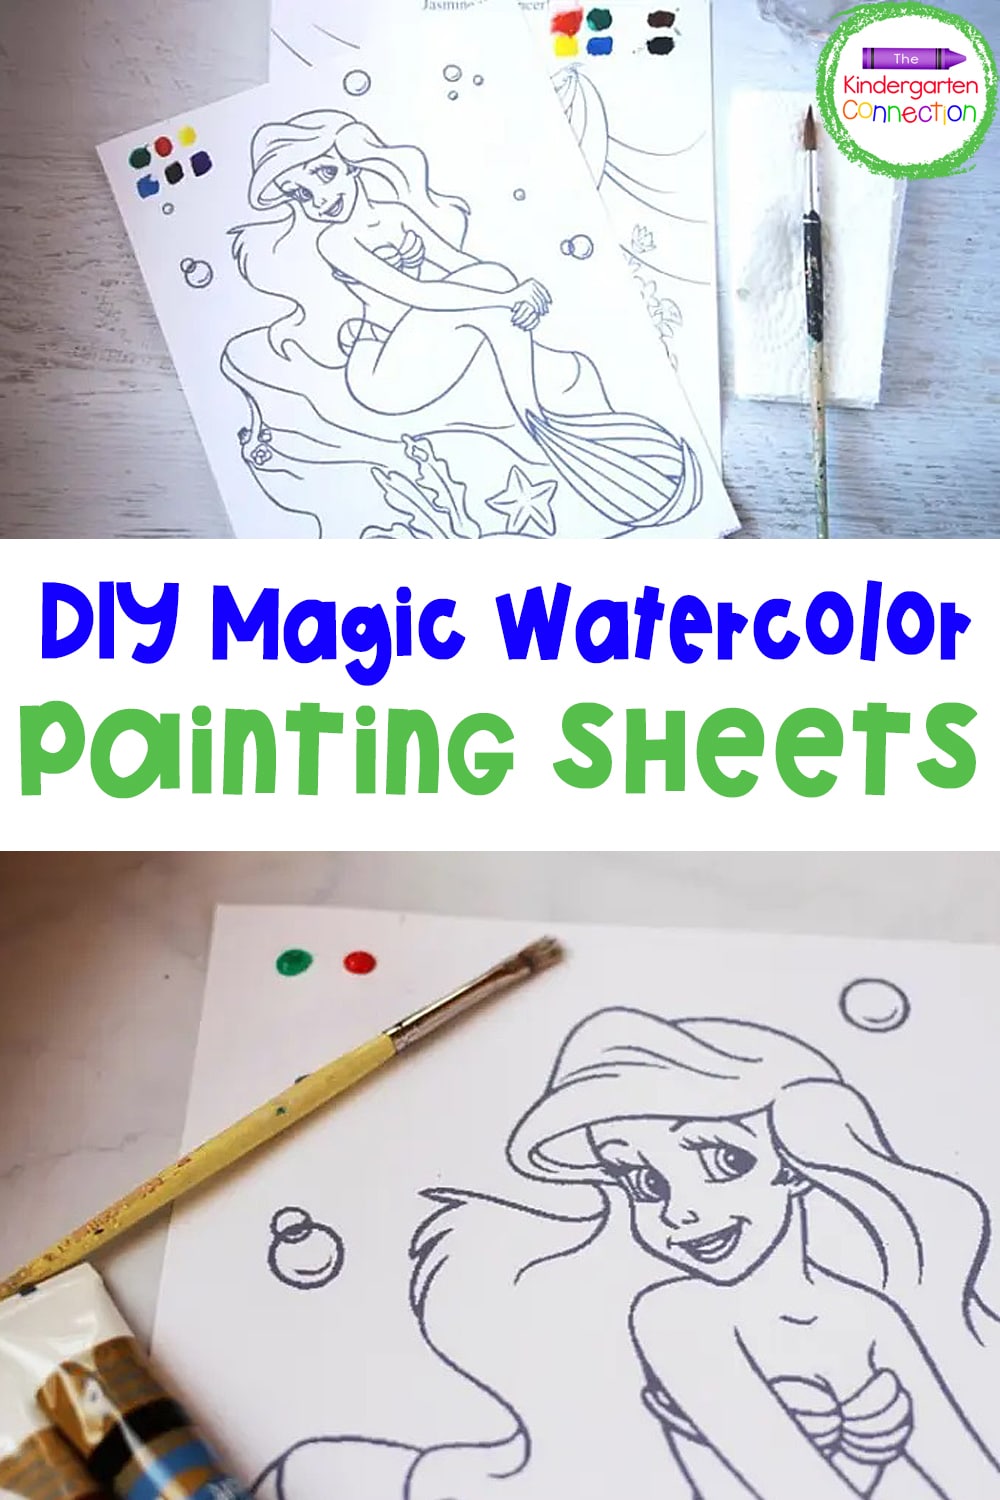 These DIY magic watercolor painting sheets for kids are a great quiet-time activity, mess-free art project, and fun art lesson too!